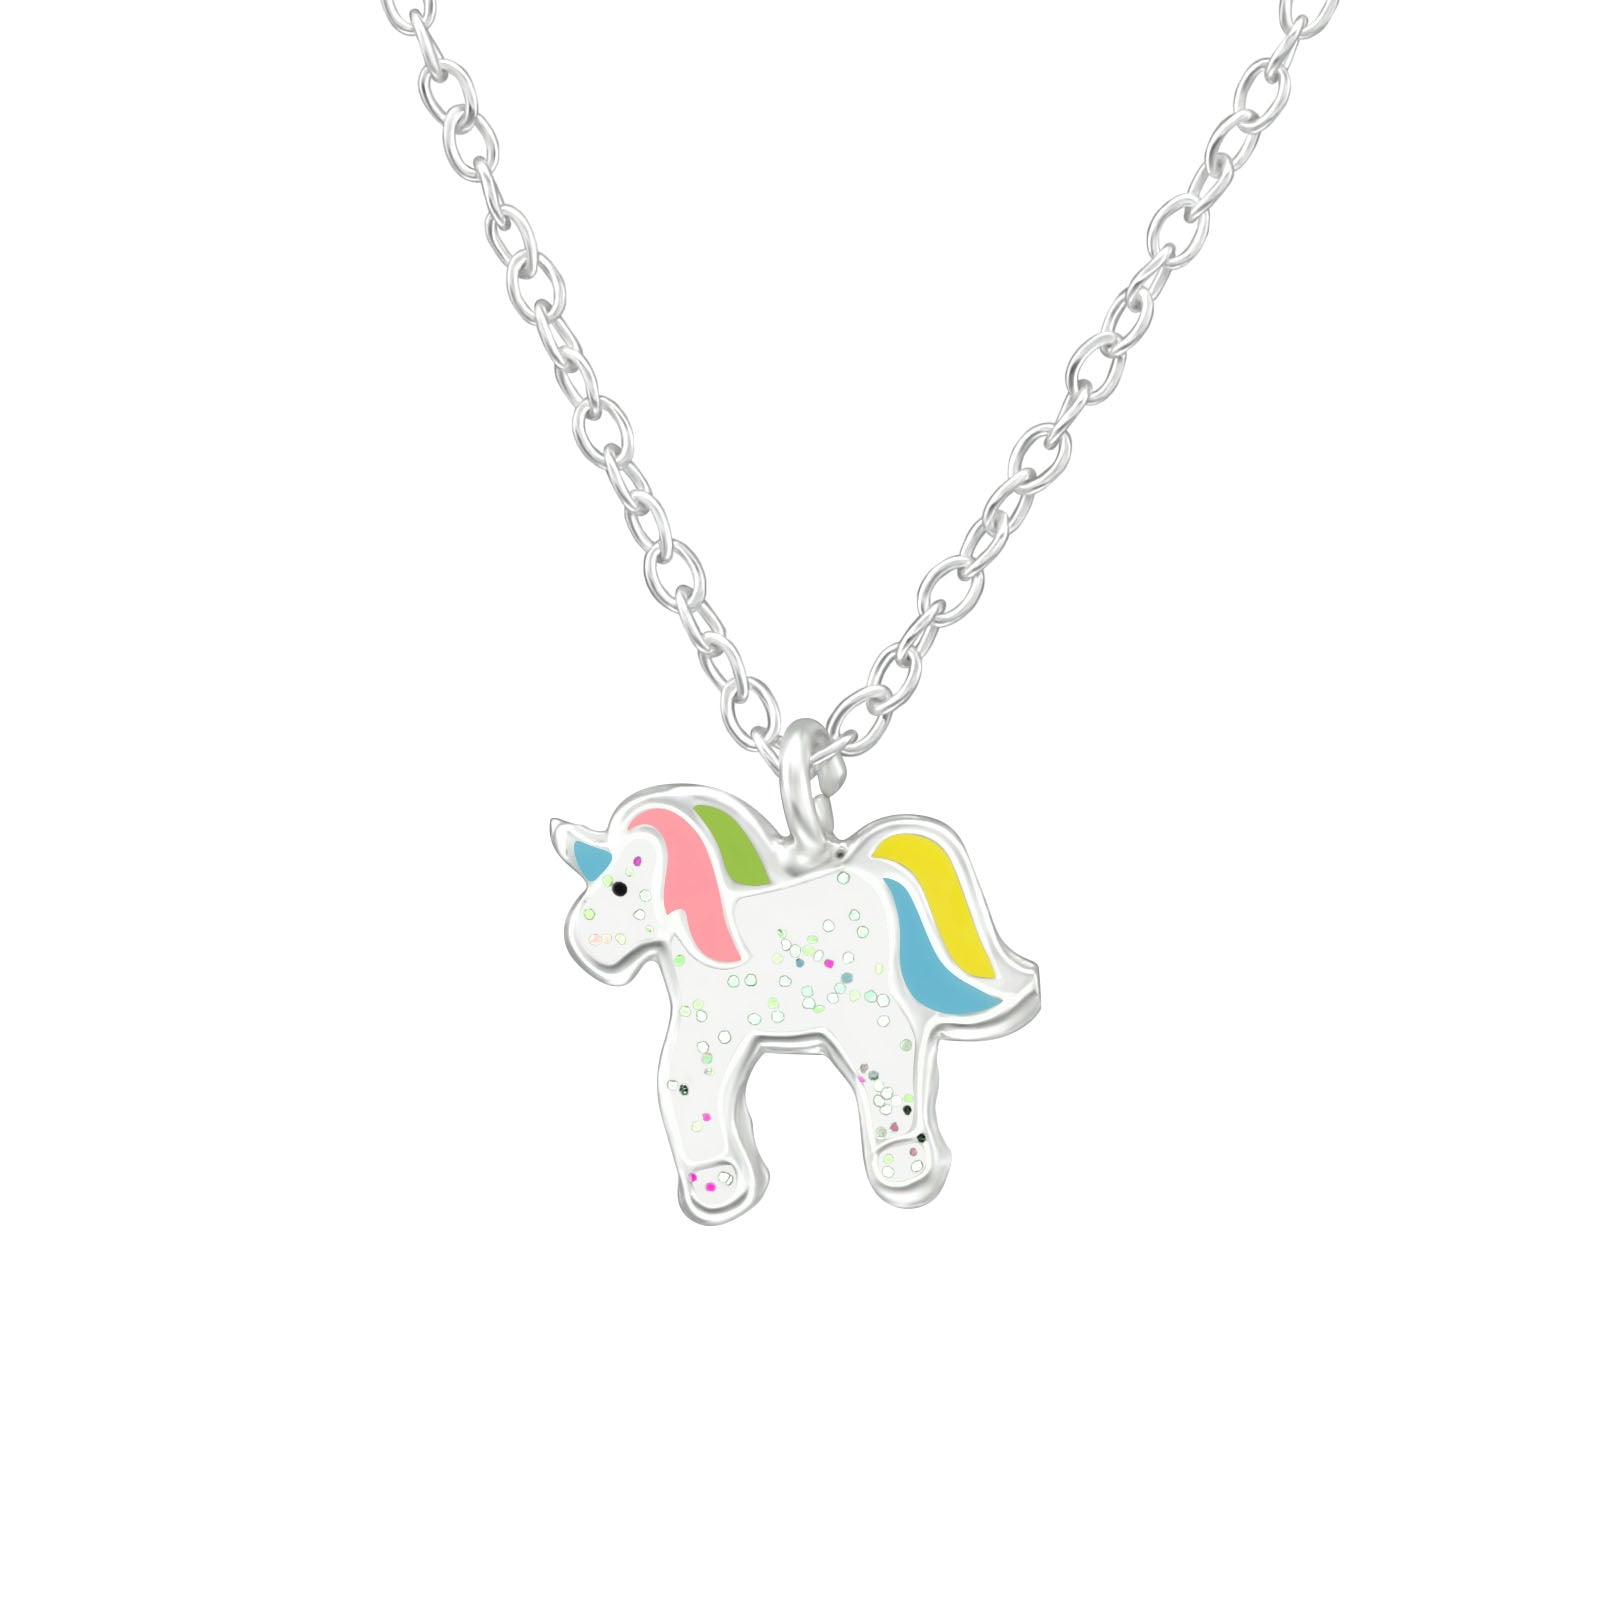 Silver Origami Unicorn Merry-go-round Necklace with Moonstone - Green Rivor